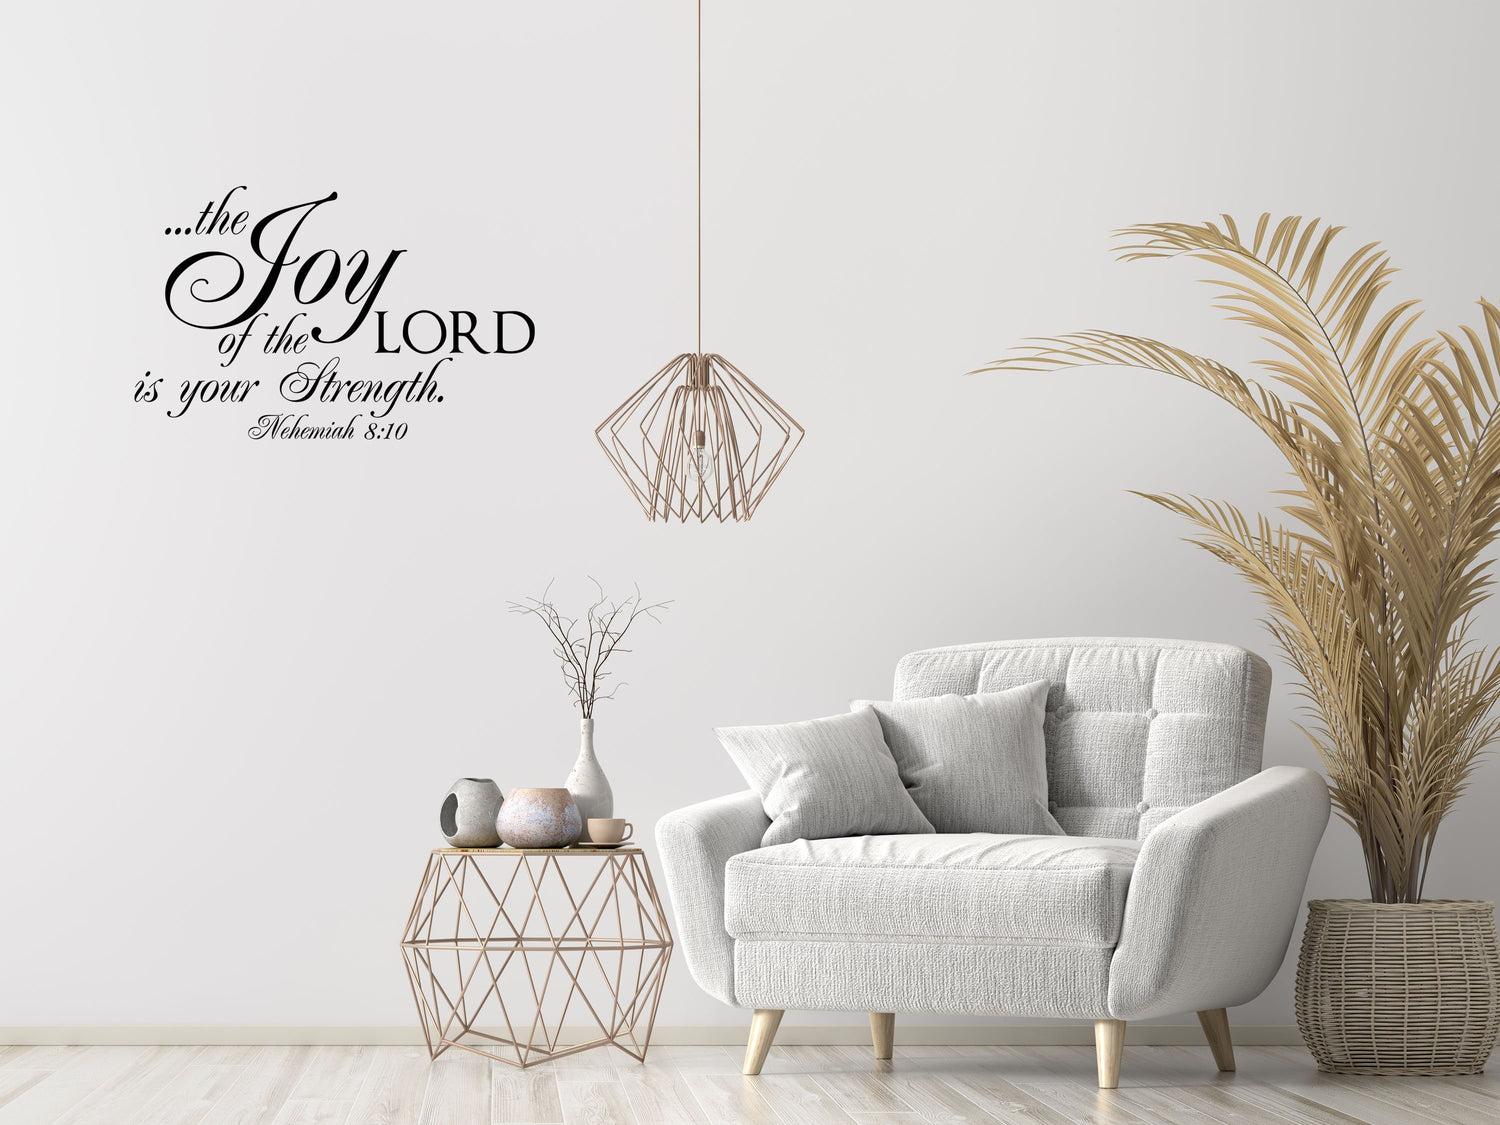 The Joy Of The Lord - Inspirational Wall Signs Vinyl Wall Decal Inspirational Wall Signs 